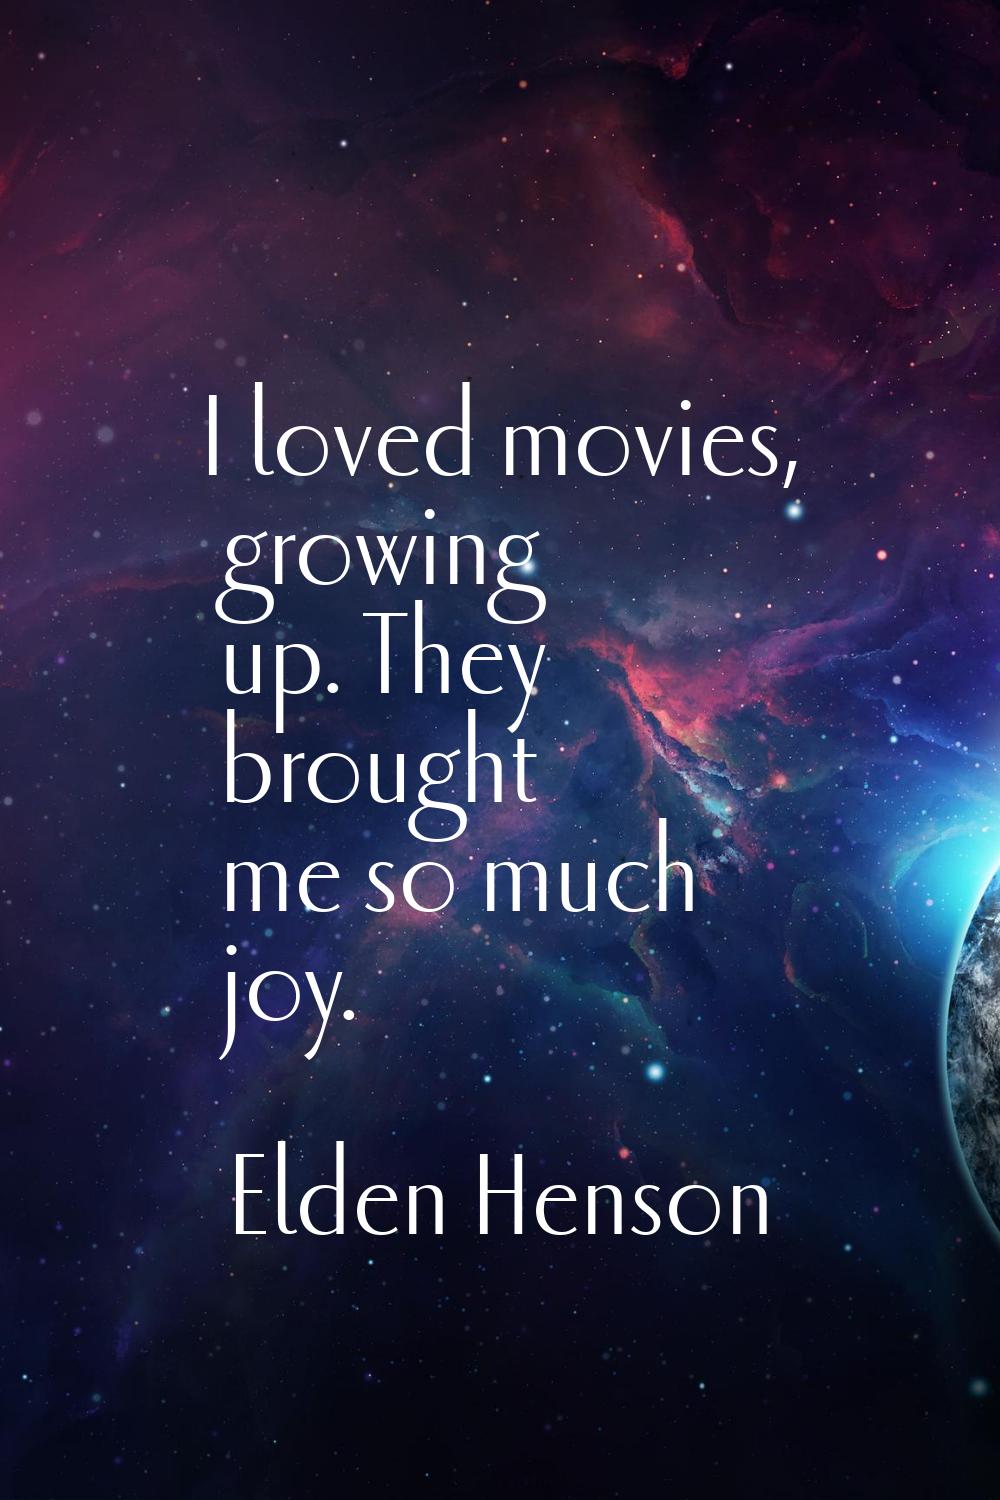 I loved movies, growing up. They brought me so much joy.